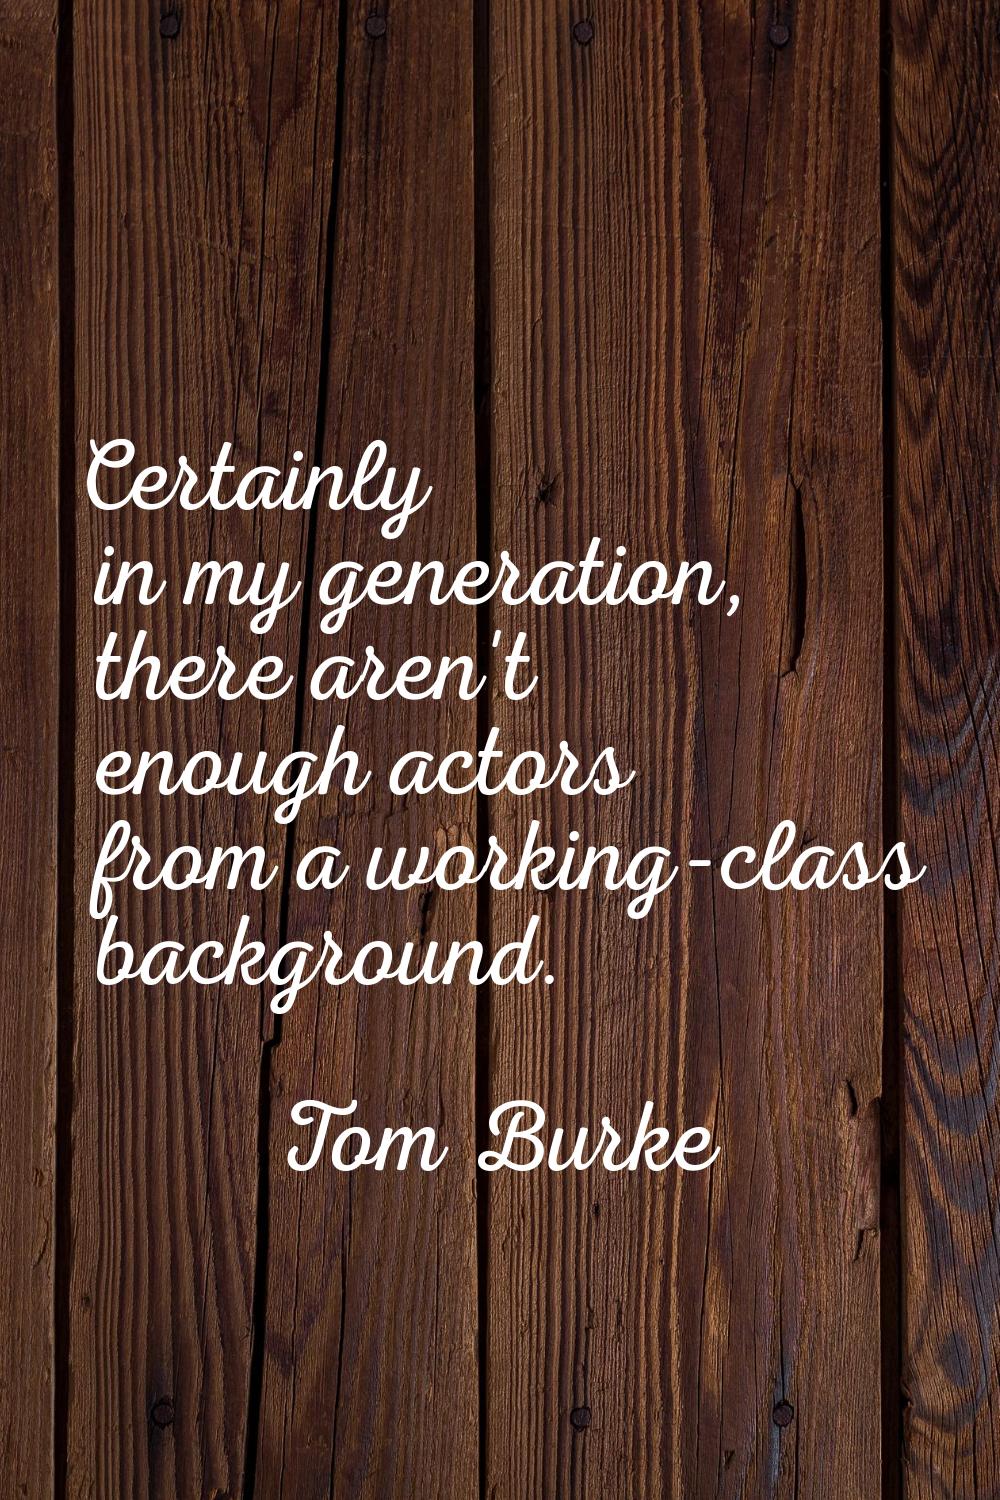 Certainly in my generation, there aren't enough actors from a working-class background.